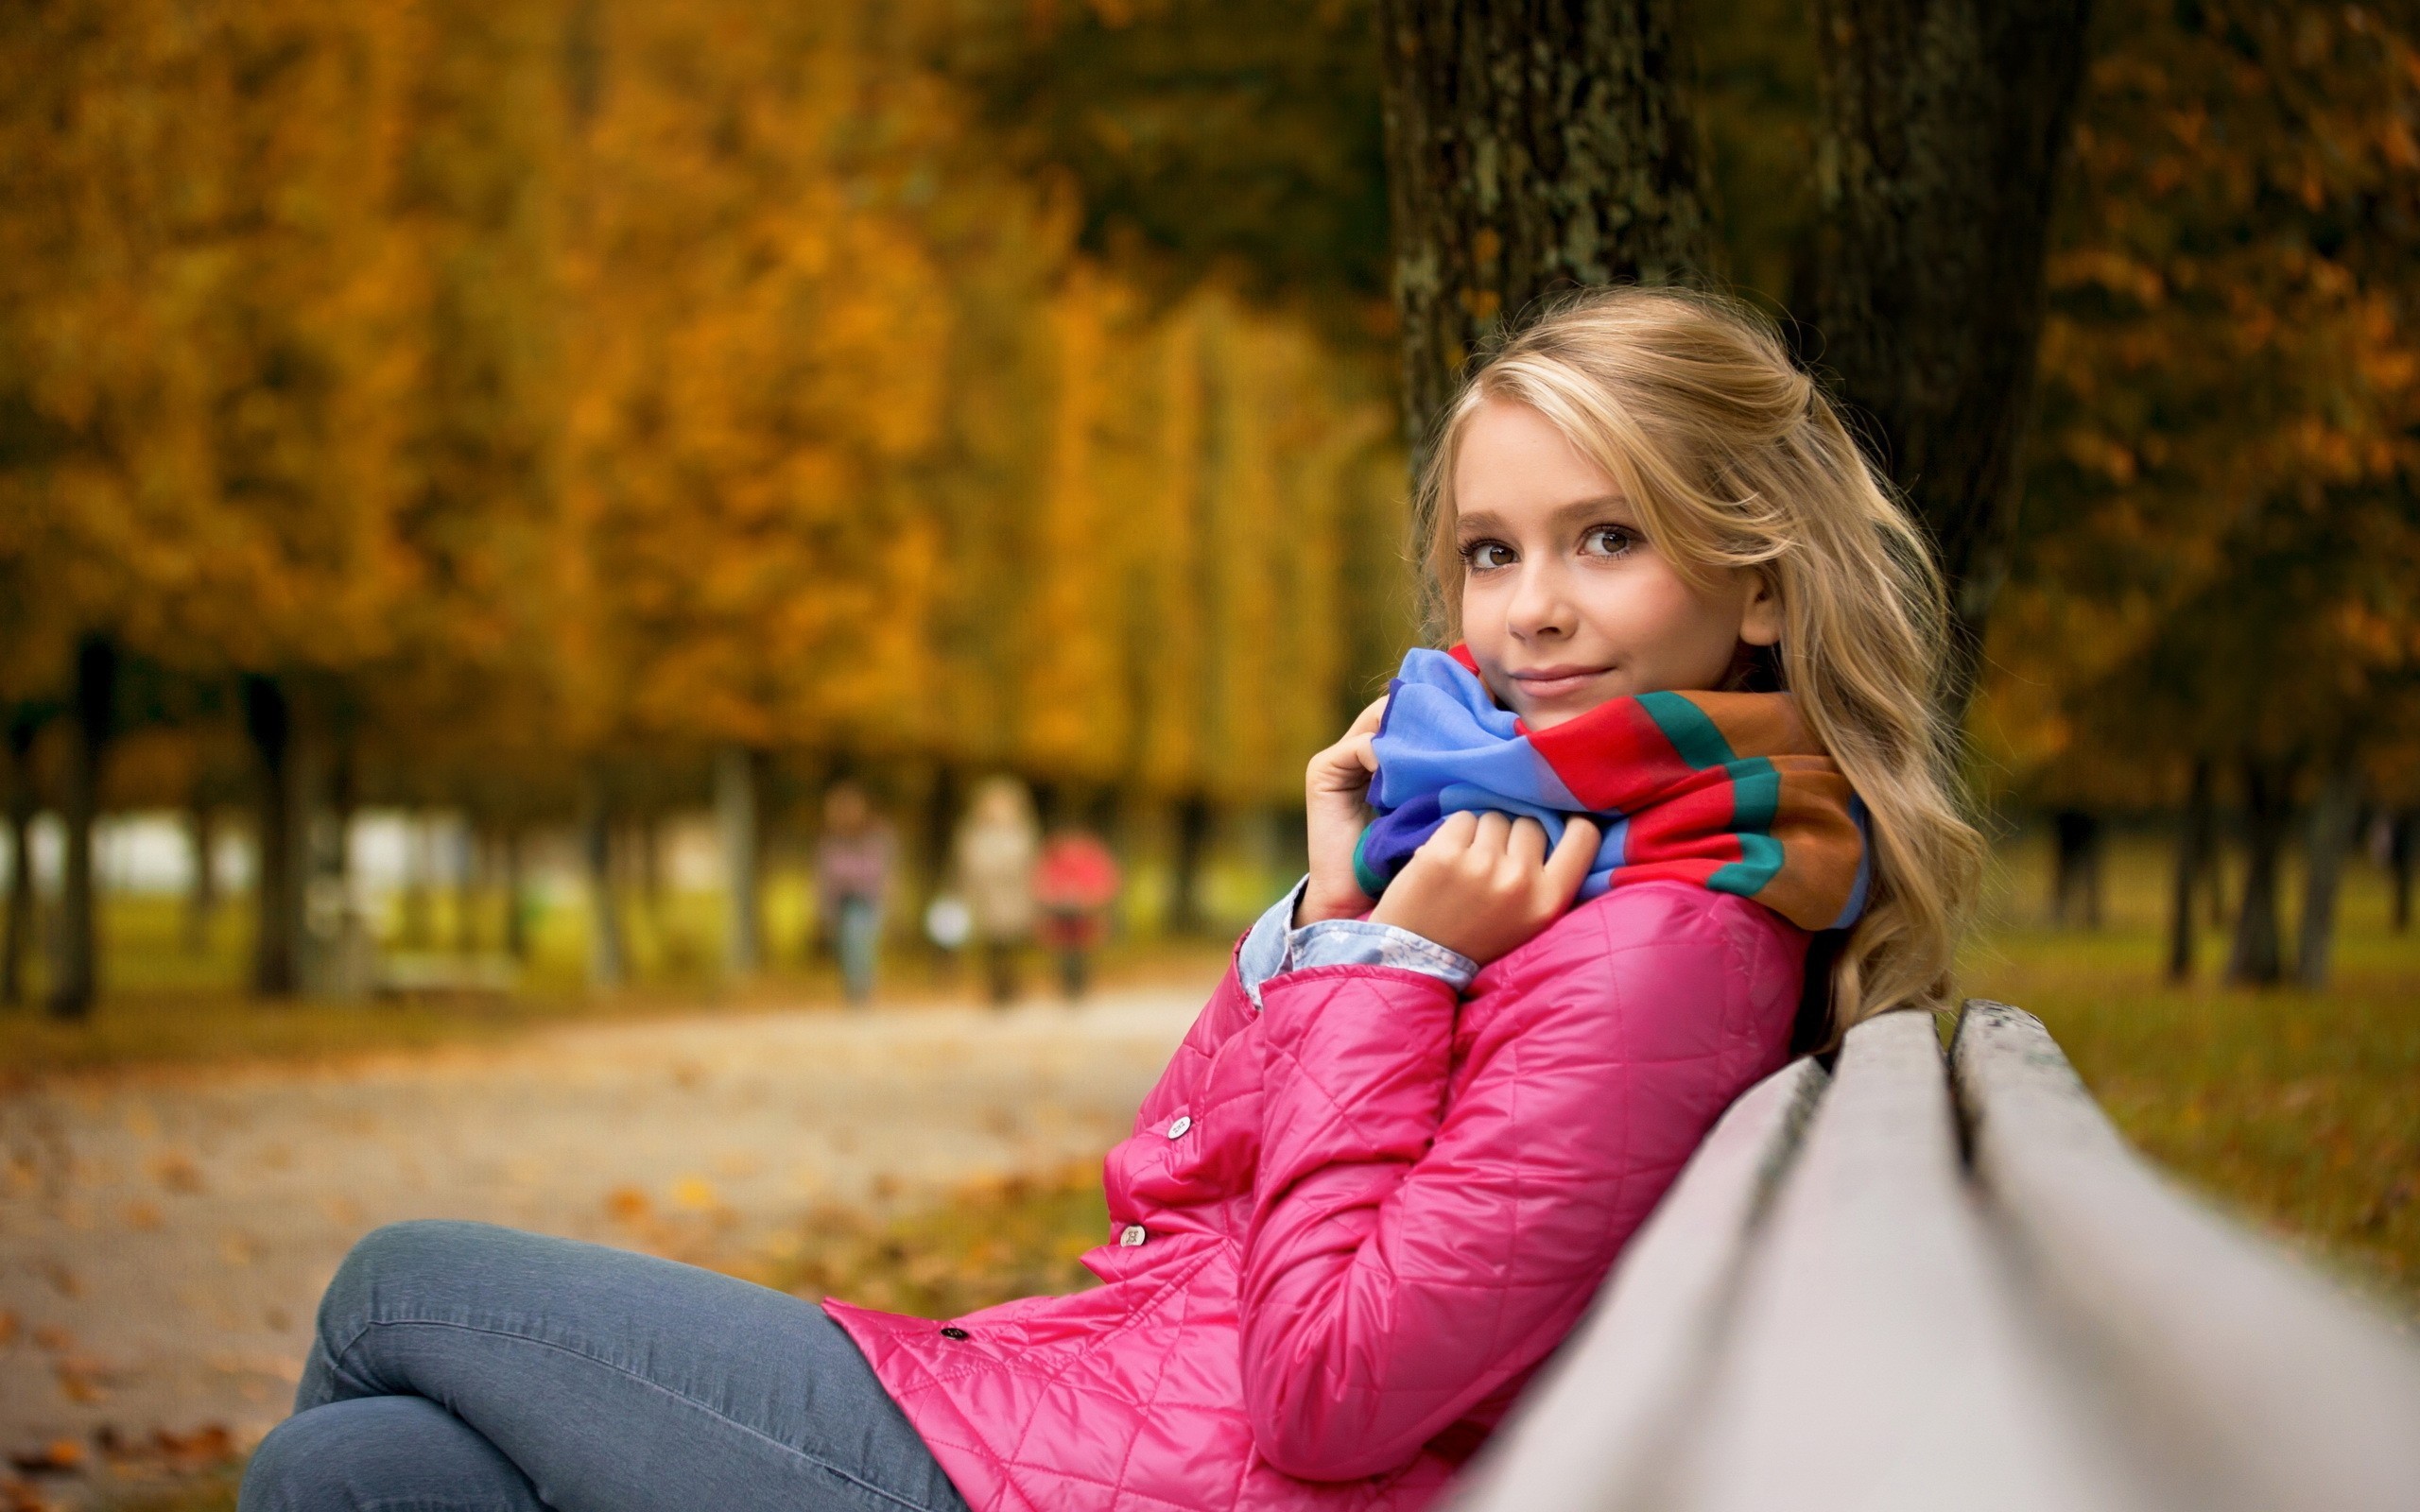 Fall Women Blonde Scarf Bench Jeans Looking At Viewer Women Outdoors Park Depth Of Field Trees Pink  2560x1600